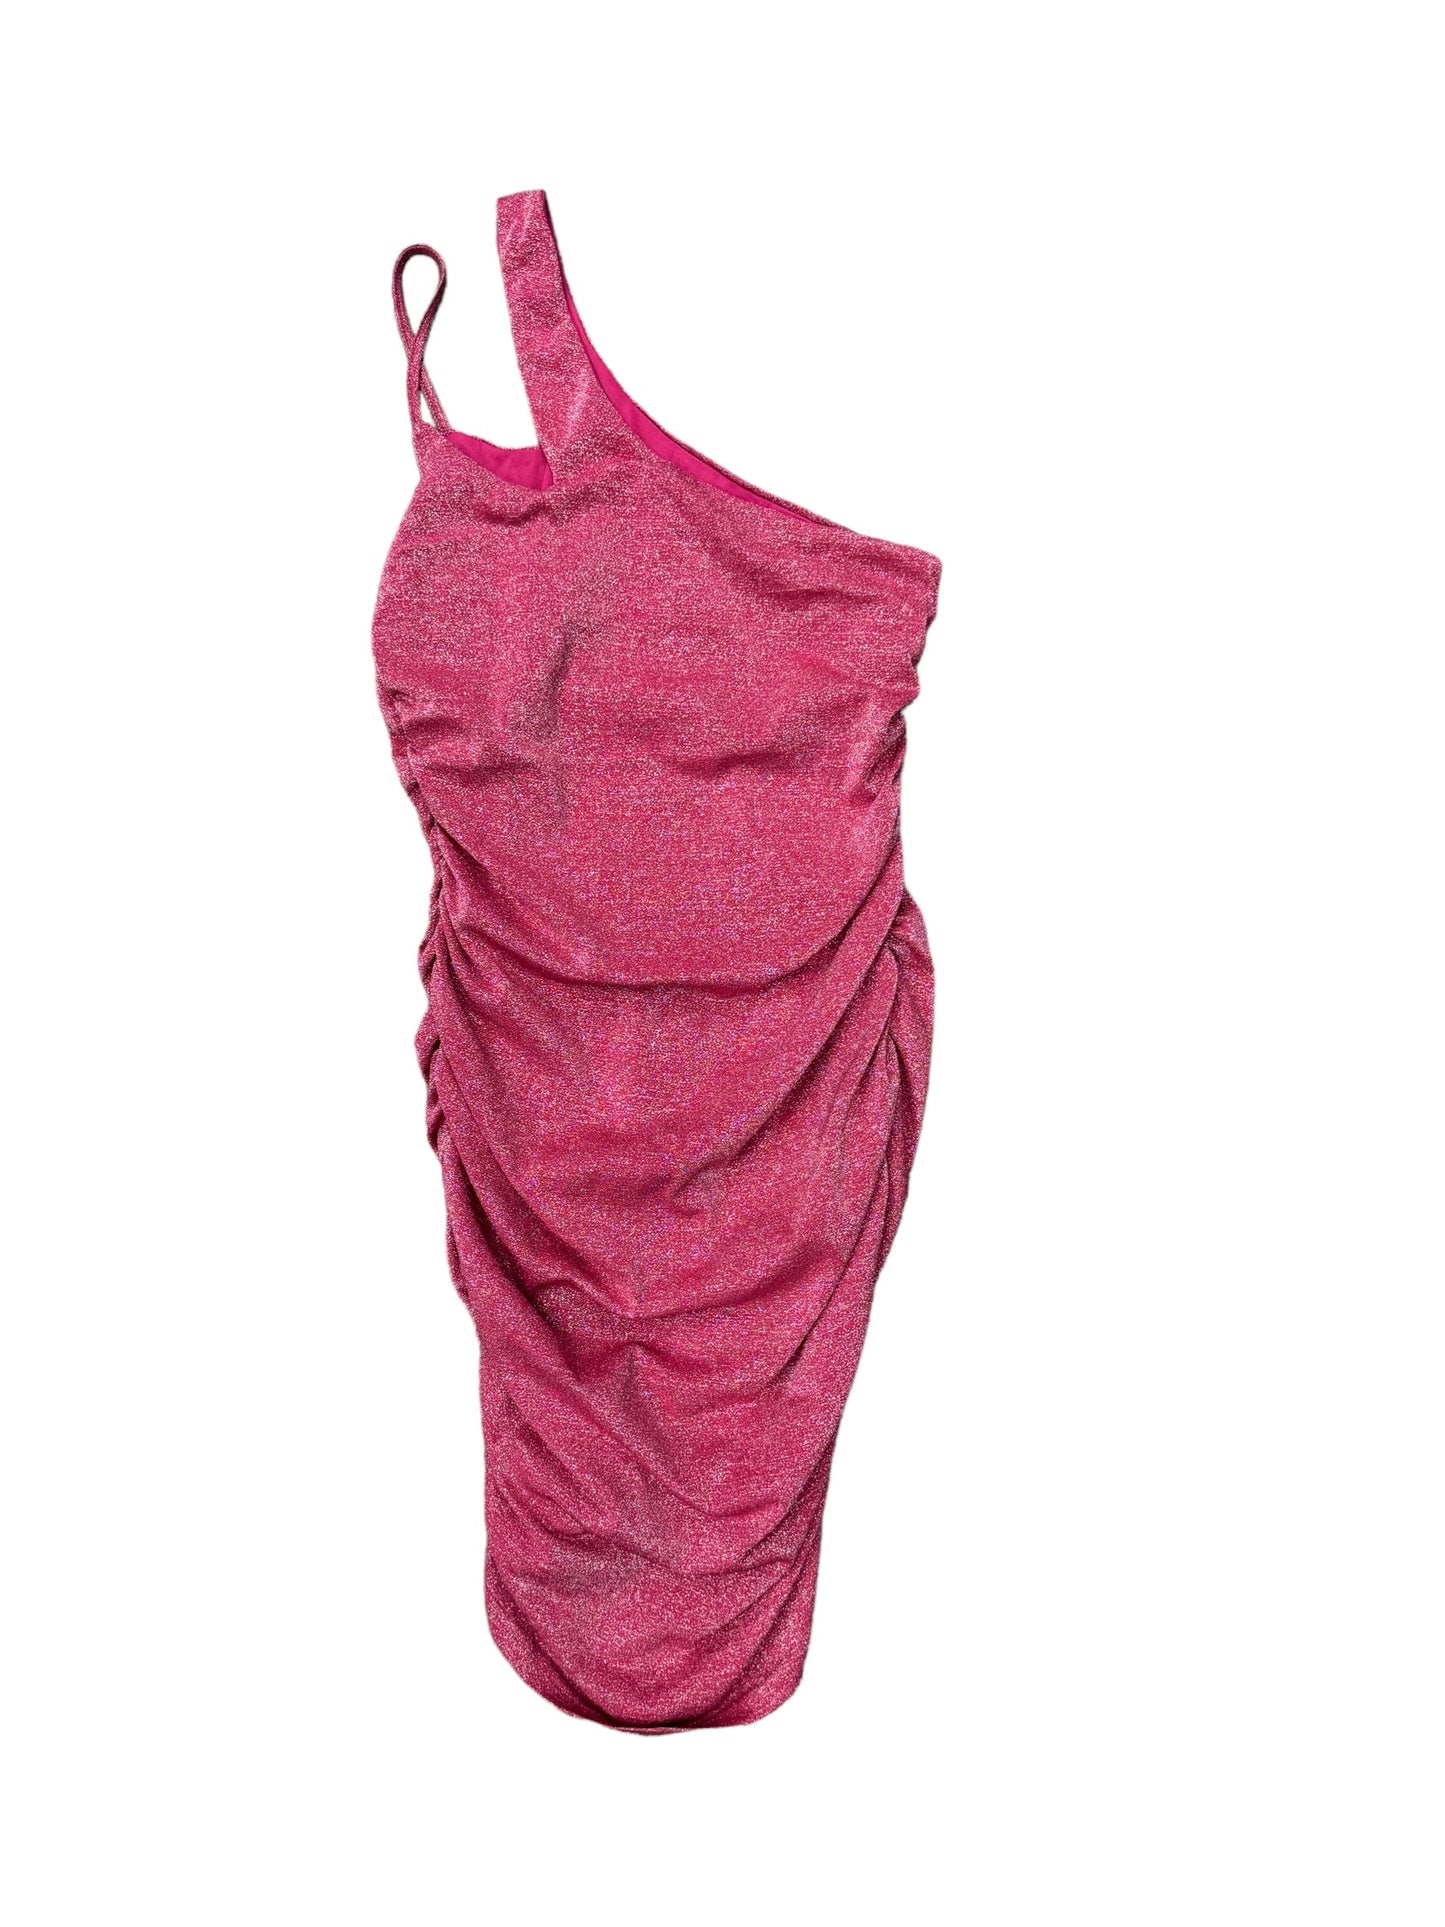 Pink Dress Party Short Clothes Mentor, Size 6